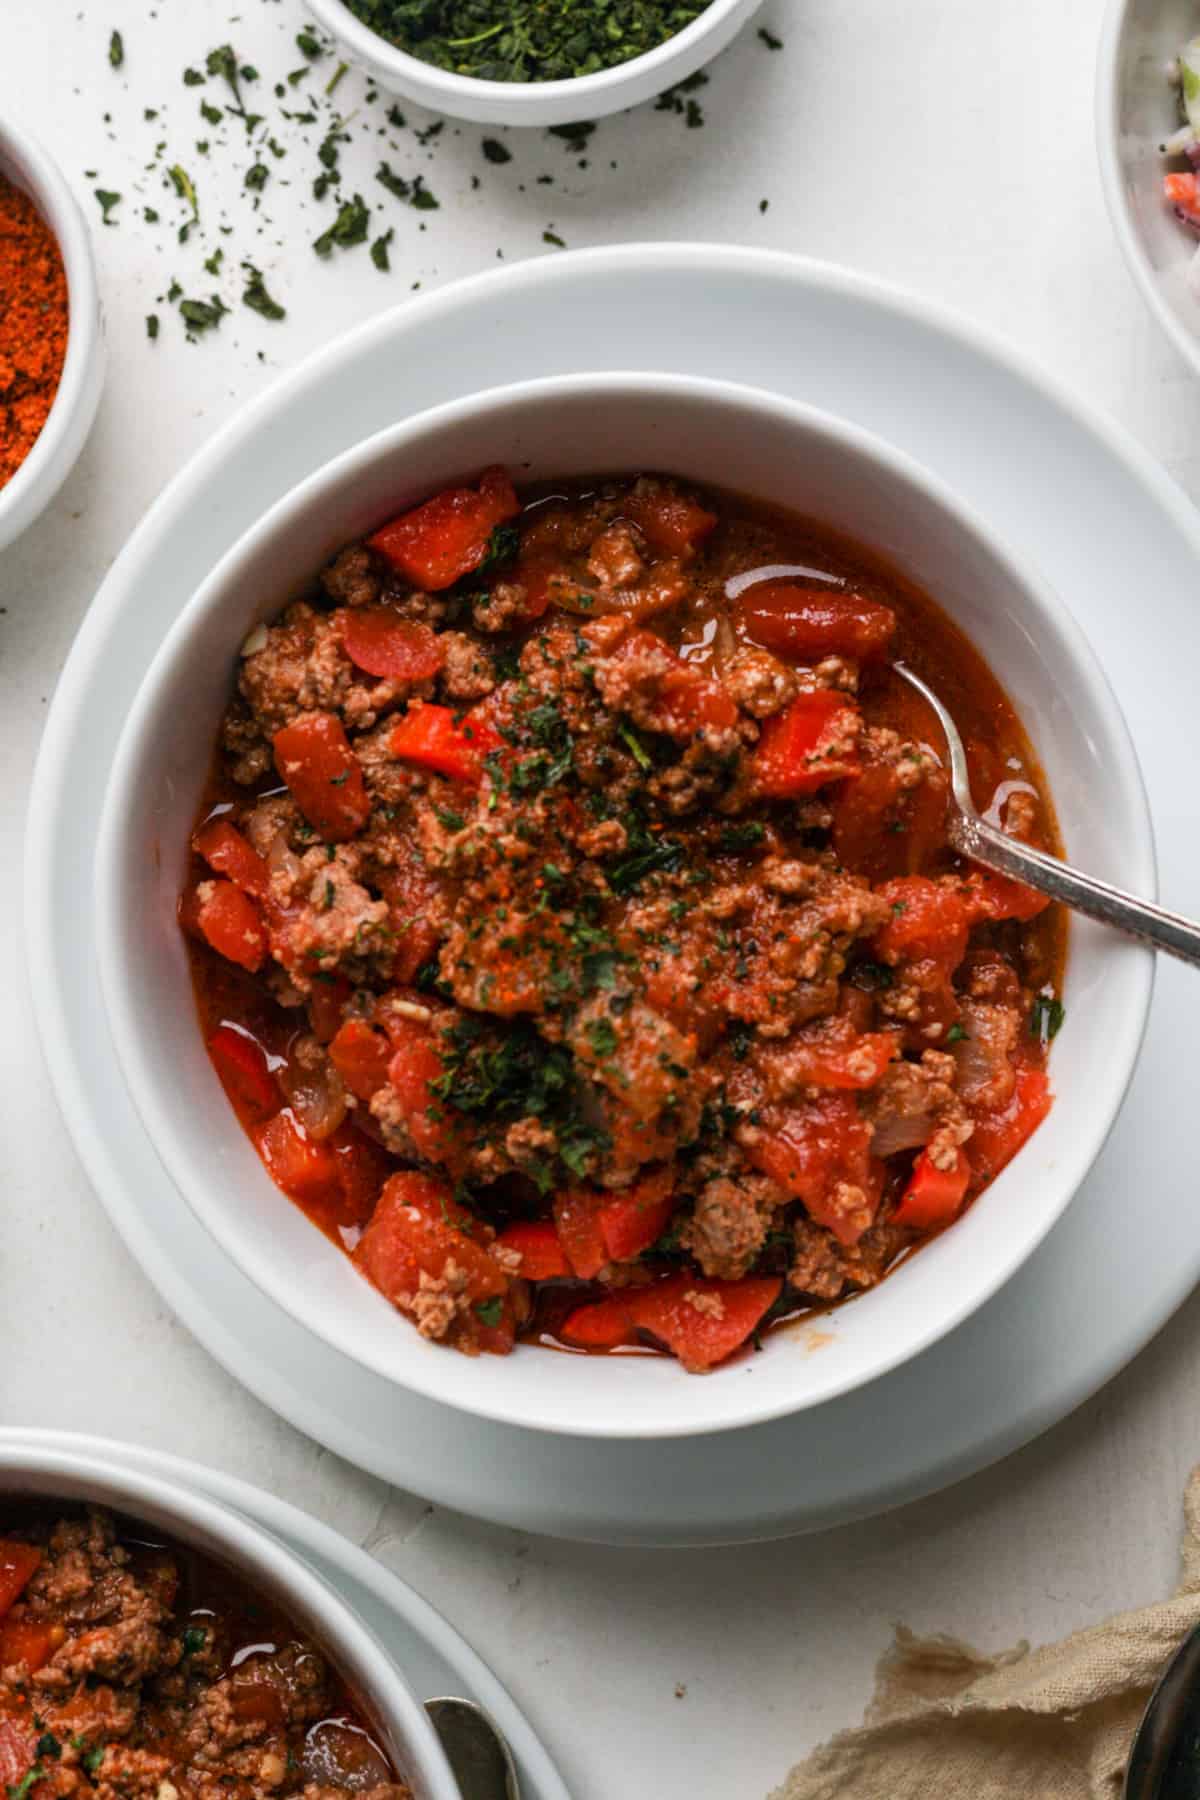 A bowl of meat and tomato stew on a white plate.